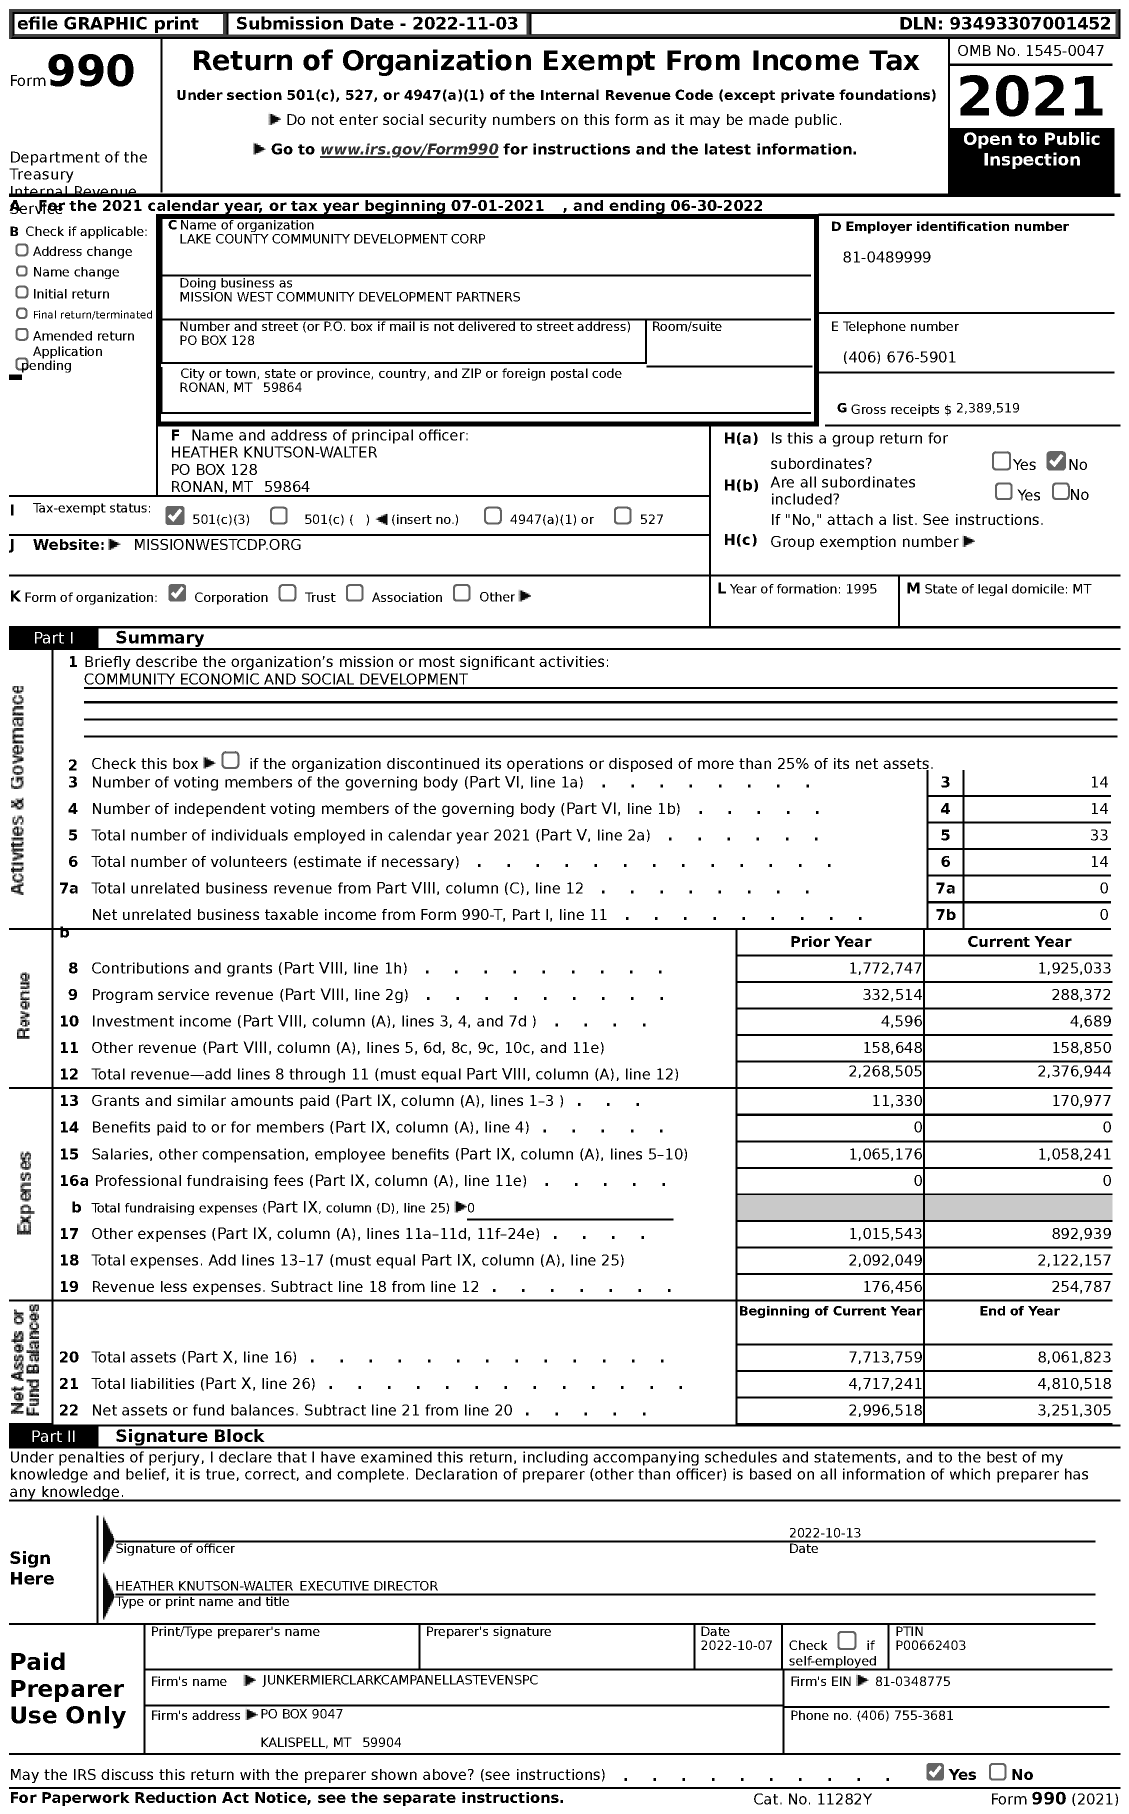 Image of first page of 2021 Form 990 for Mission West Community Development Partners